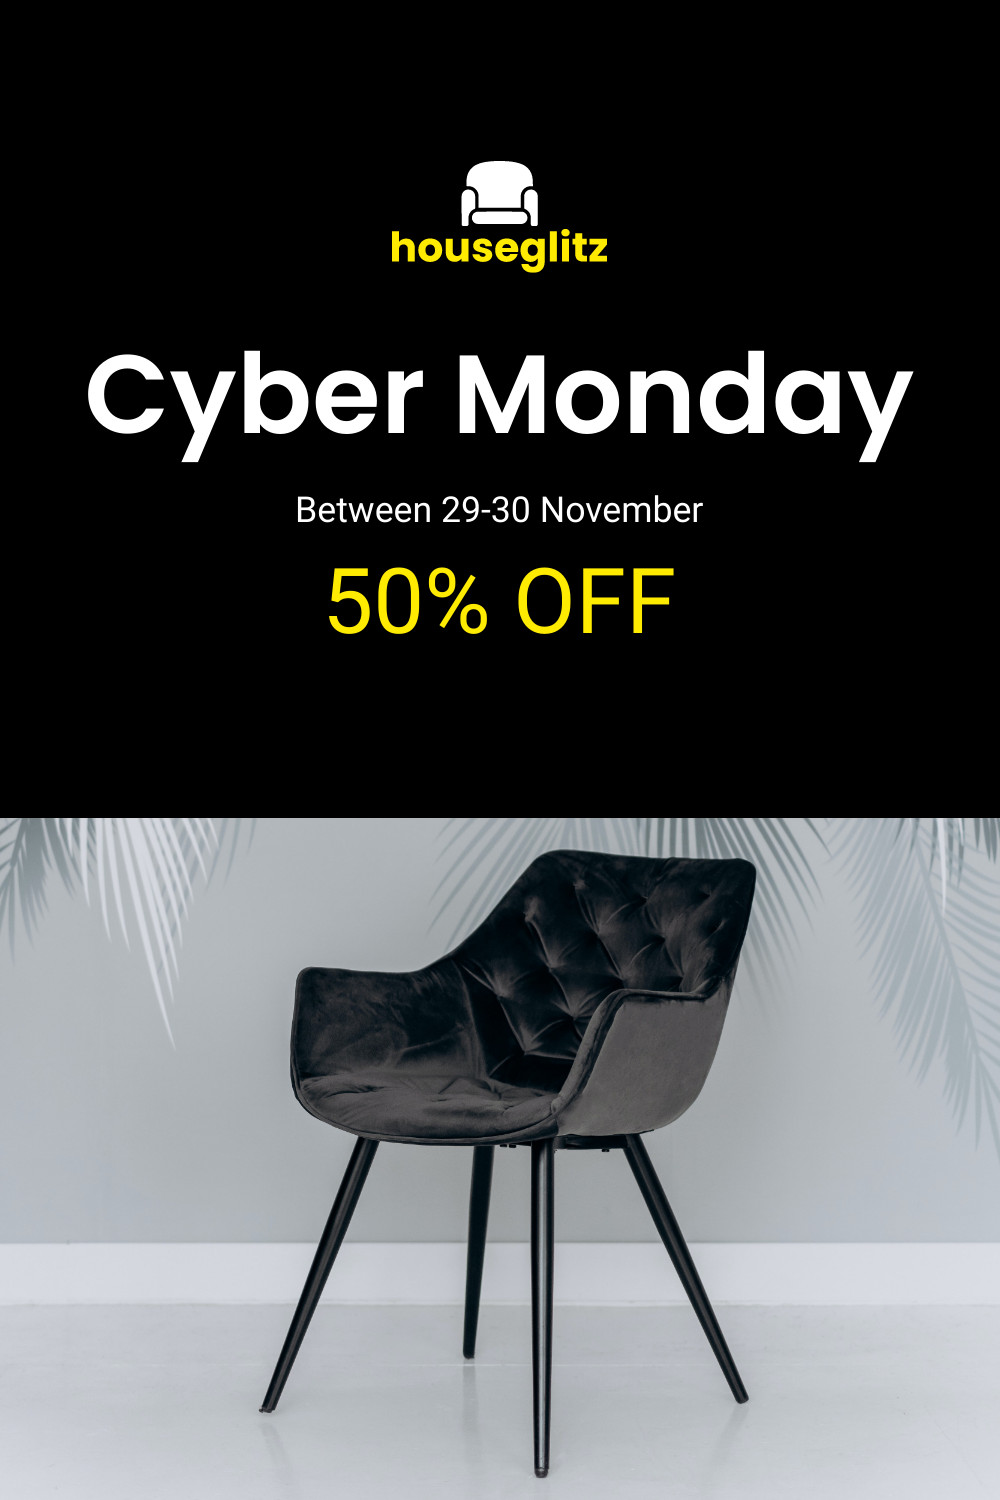 Cyber Monday Black Chair Discounts Inline Rectangle 300x250